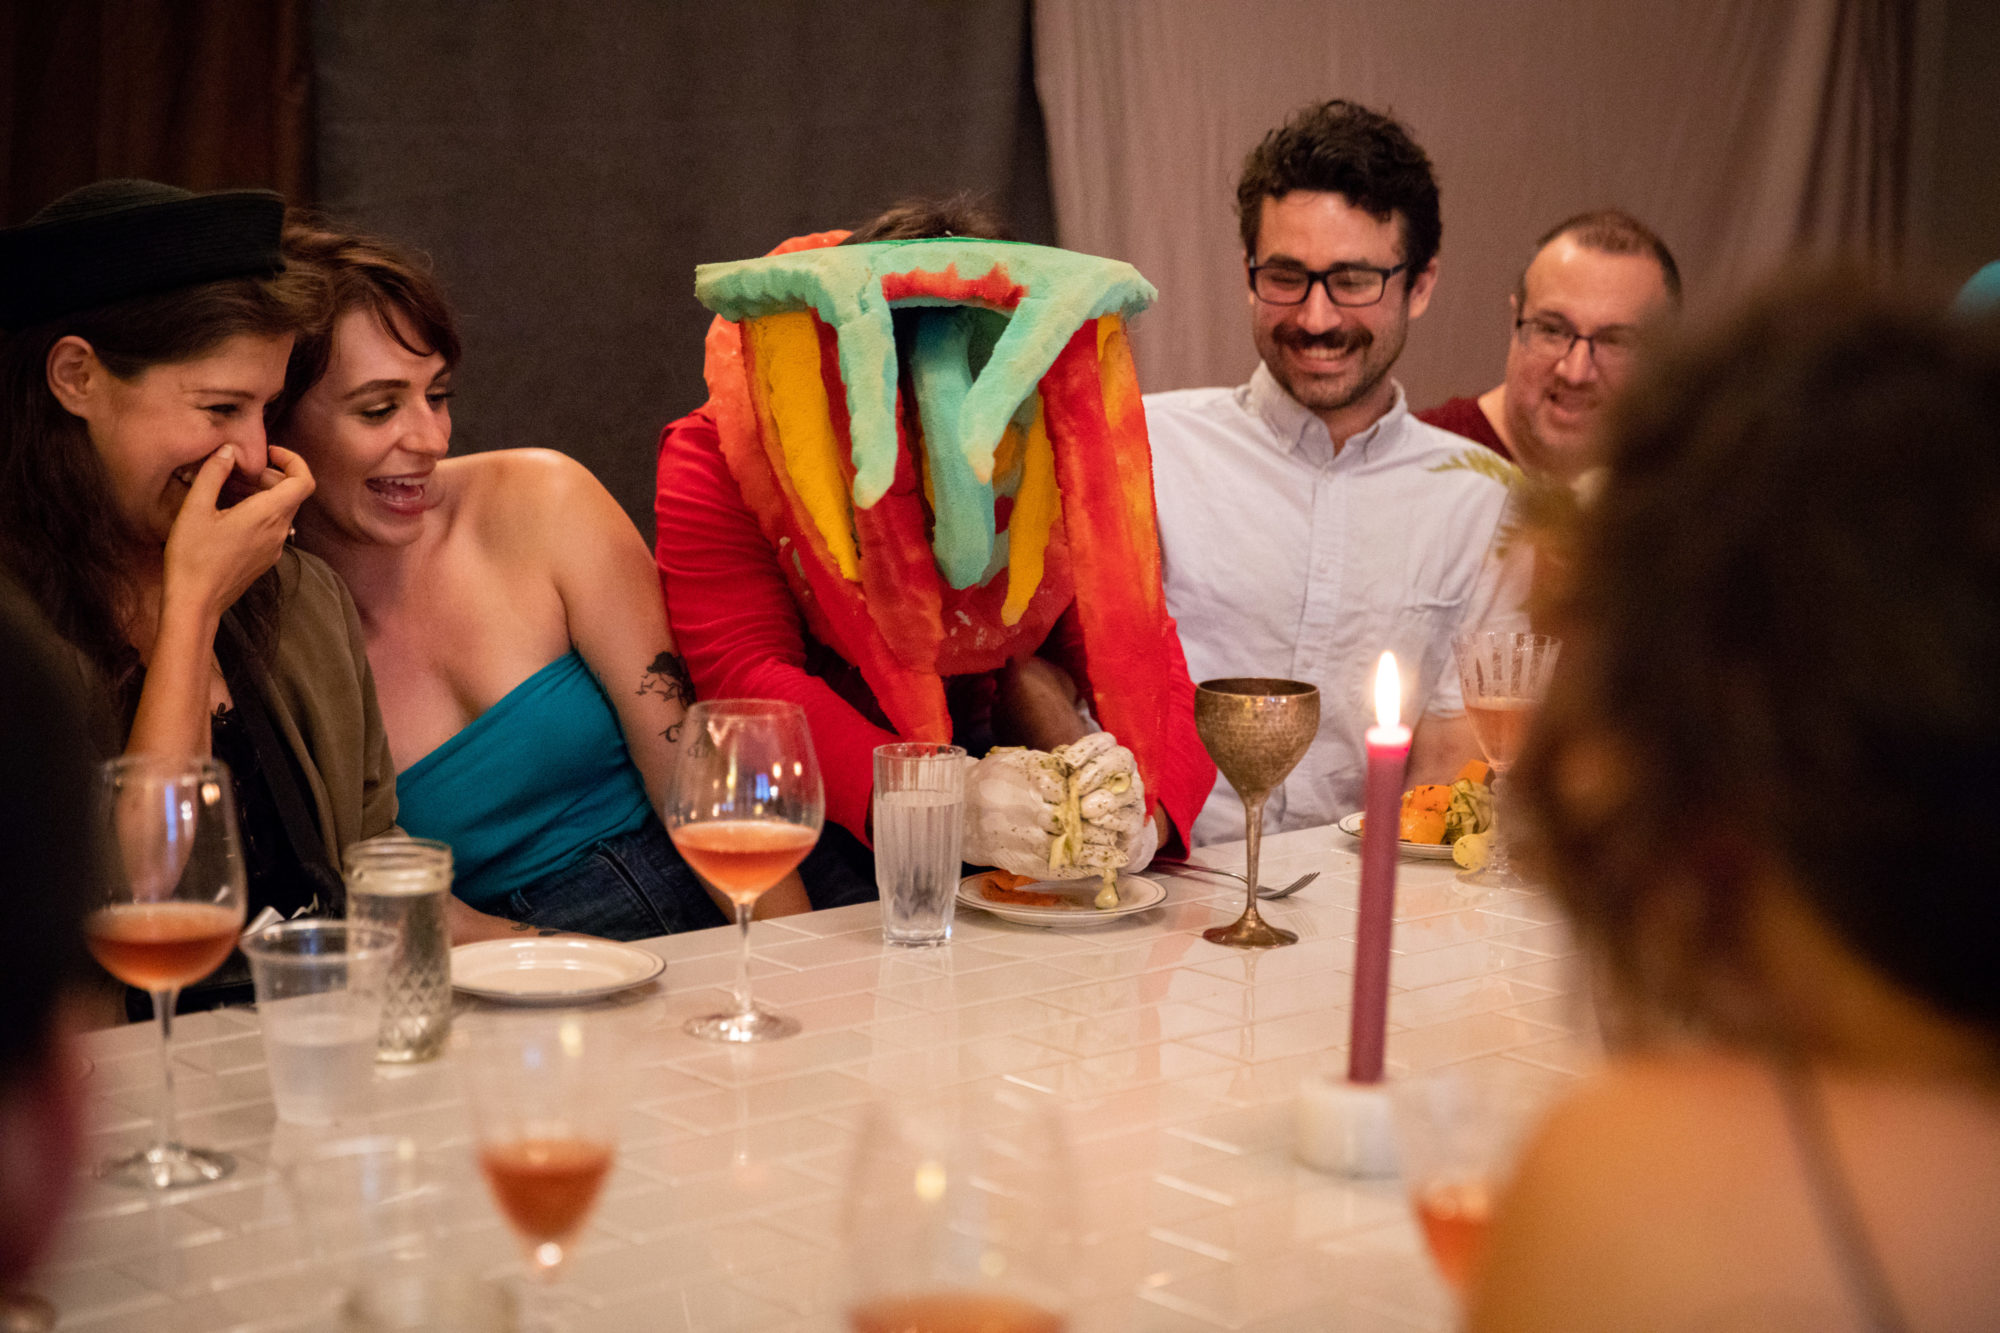 person in red clothing and wearing a mask plays with food at a table with other people